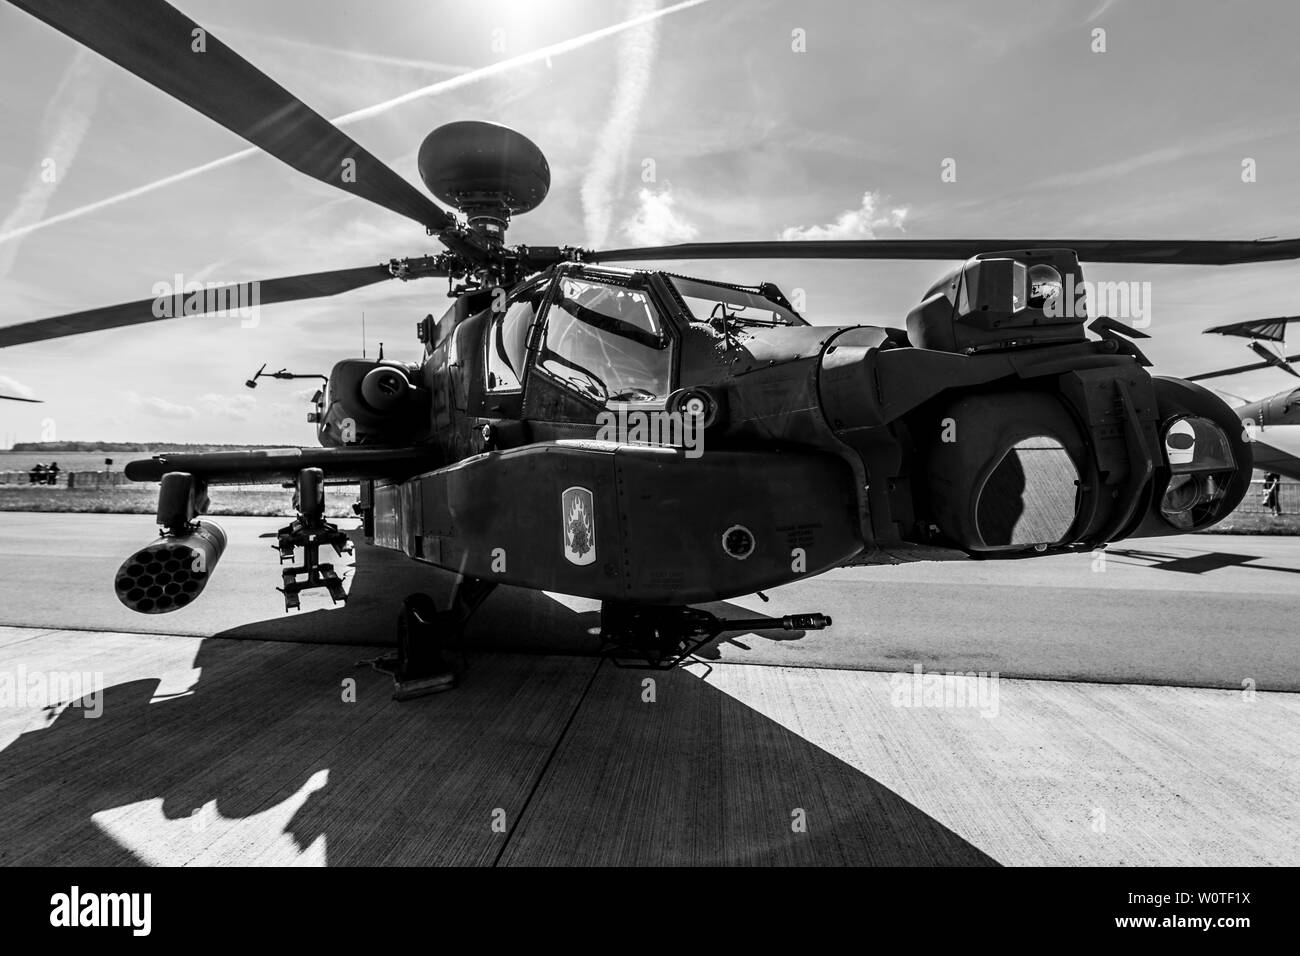 BERLIN, GERMANY - APRIL 27, 2018: Attack helicopter Boeing AH-64D Apache Longbow. US Army. Black and white. Exhibition ILA Berlin Air Show 2018 Stock Photo